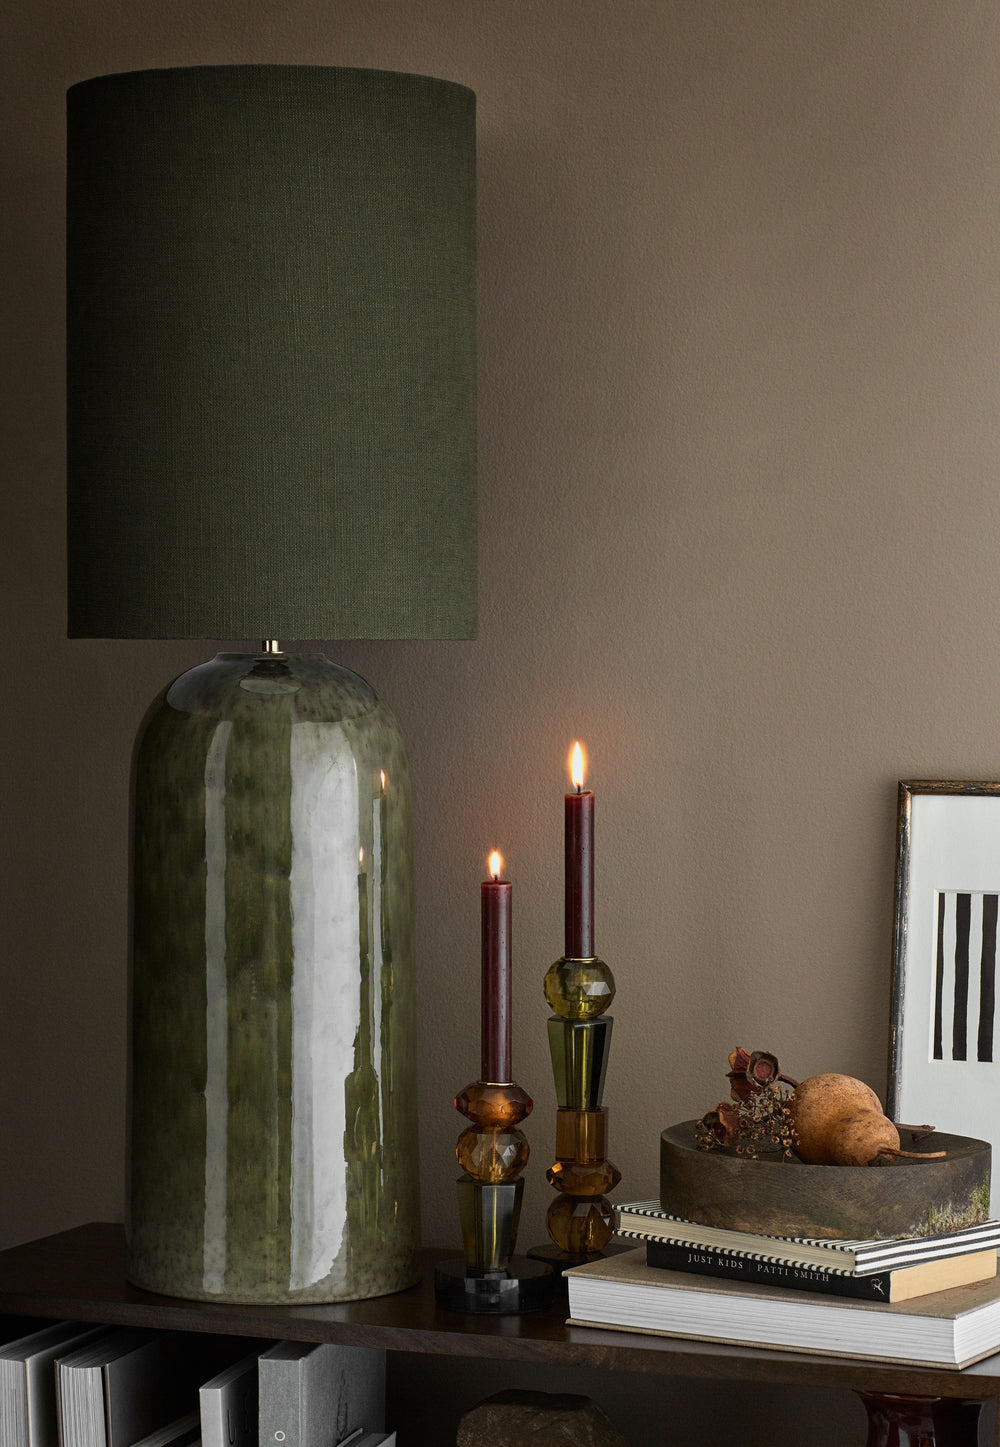 Cozy Living Asla Lamp w. Lampshade - ARMY